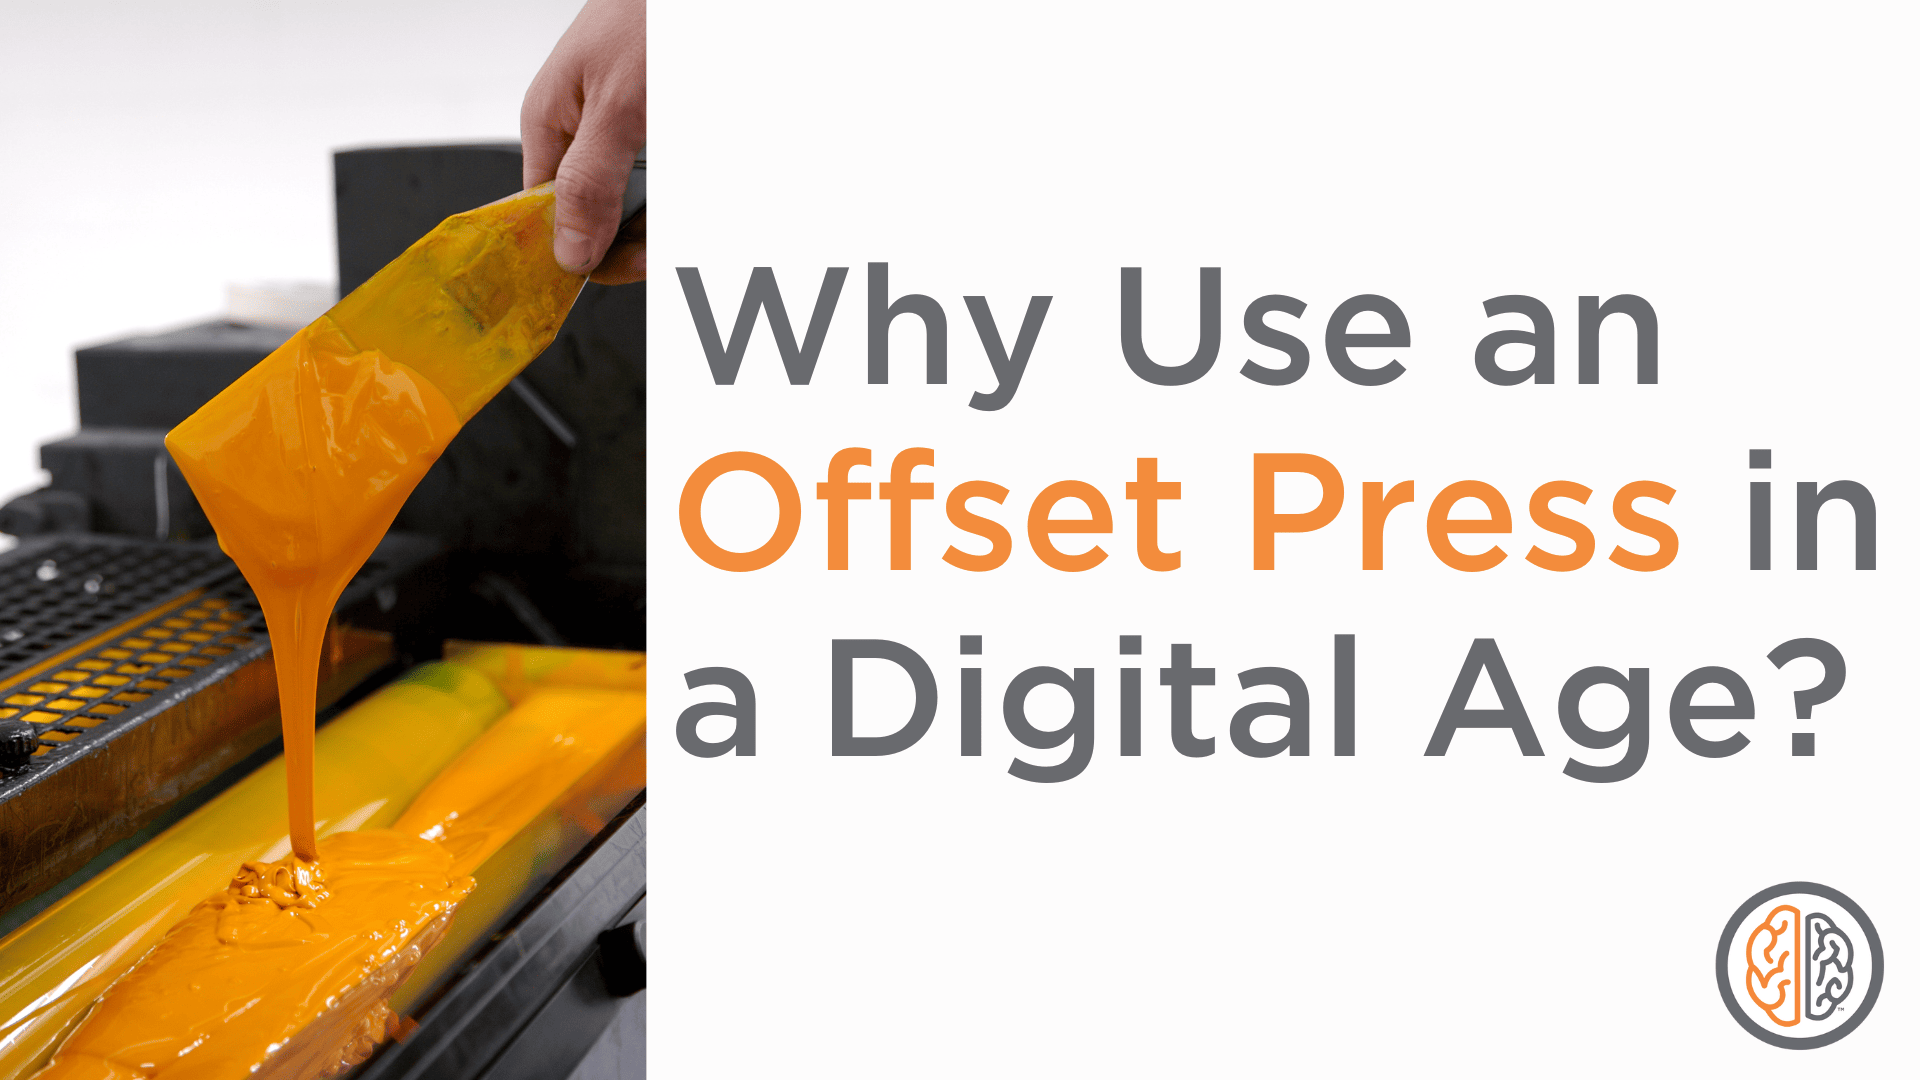 Offset Printing in a Digital Age